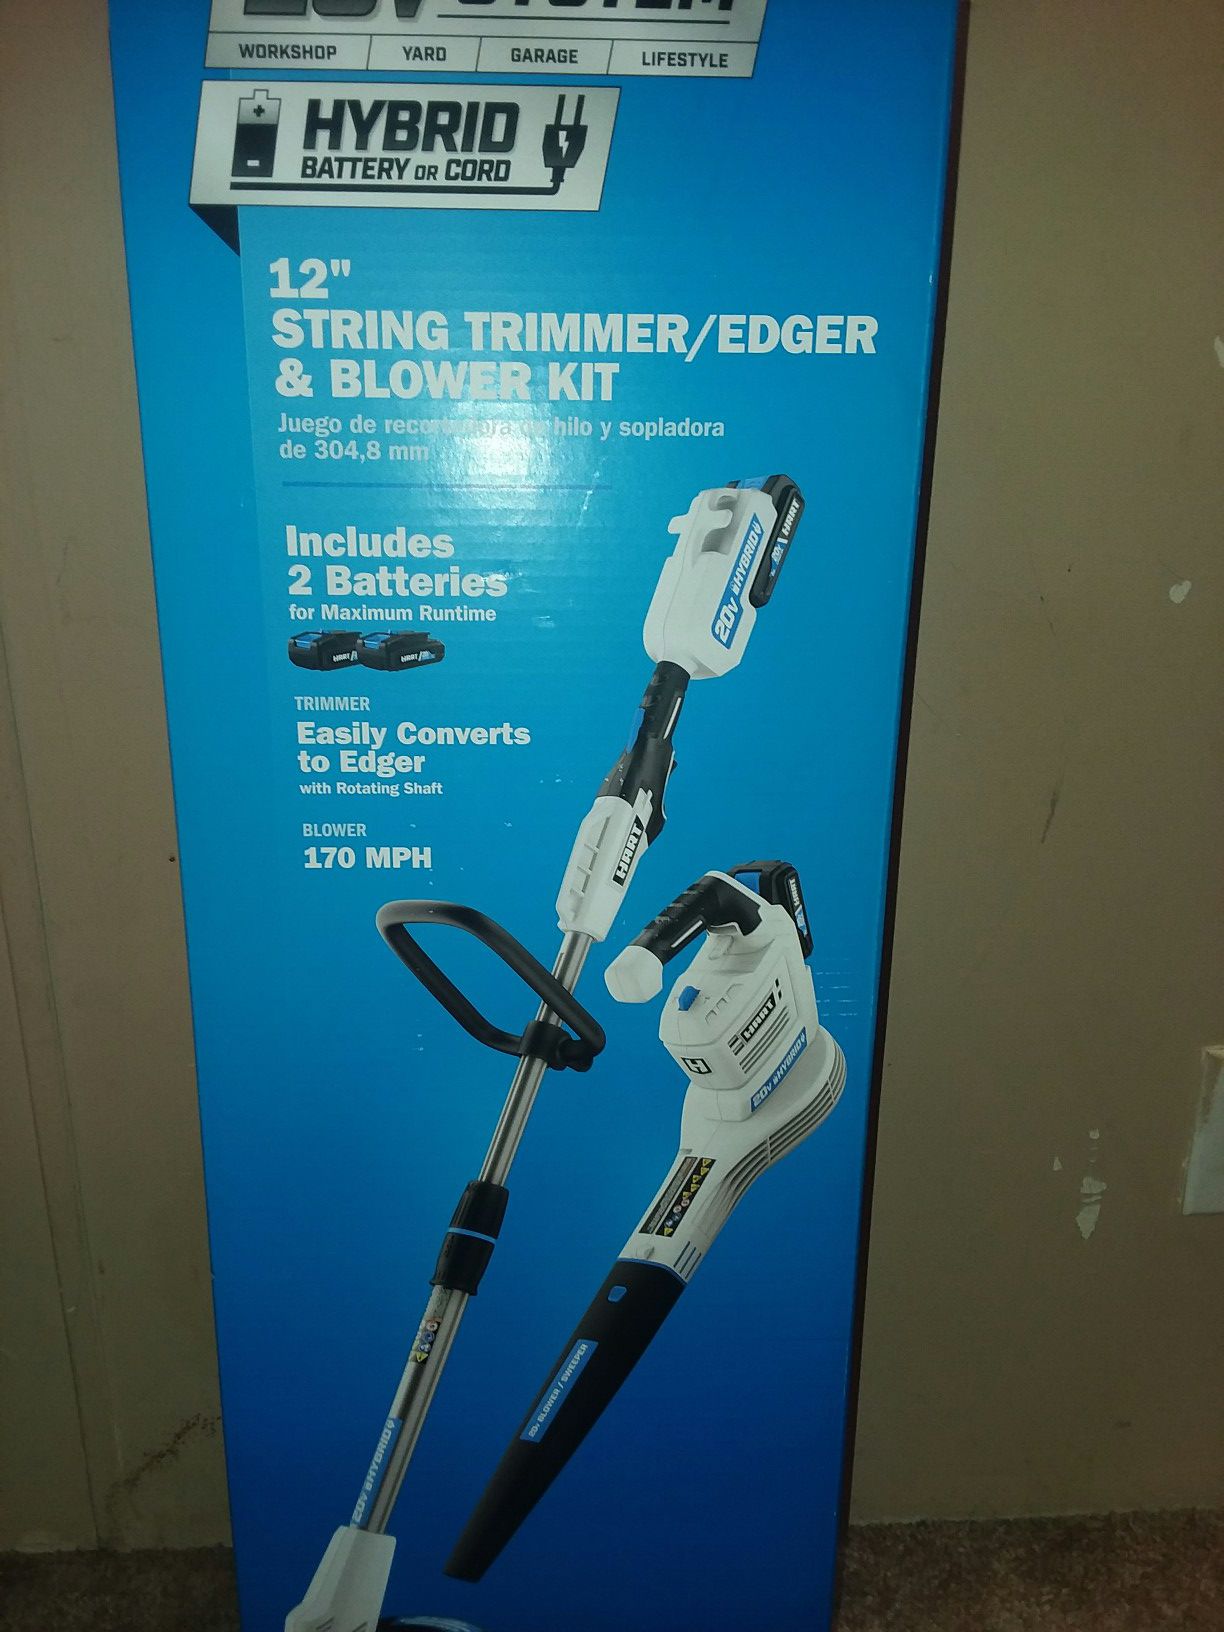 HART tRimmer and leaf blower with